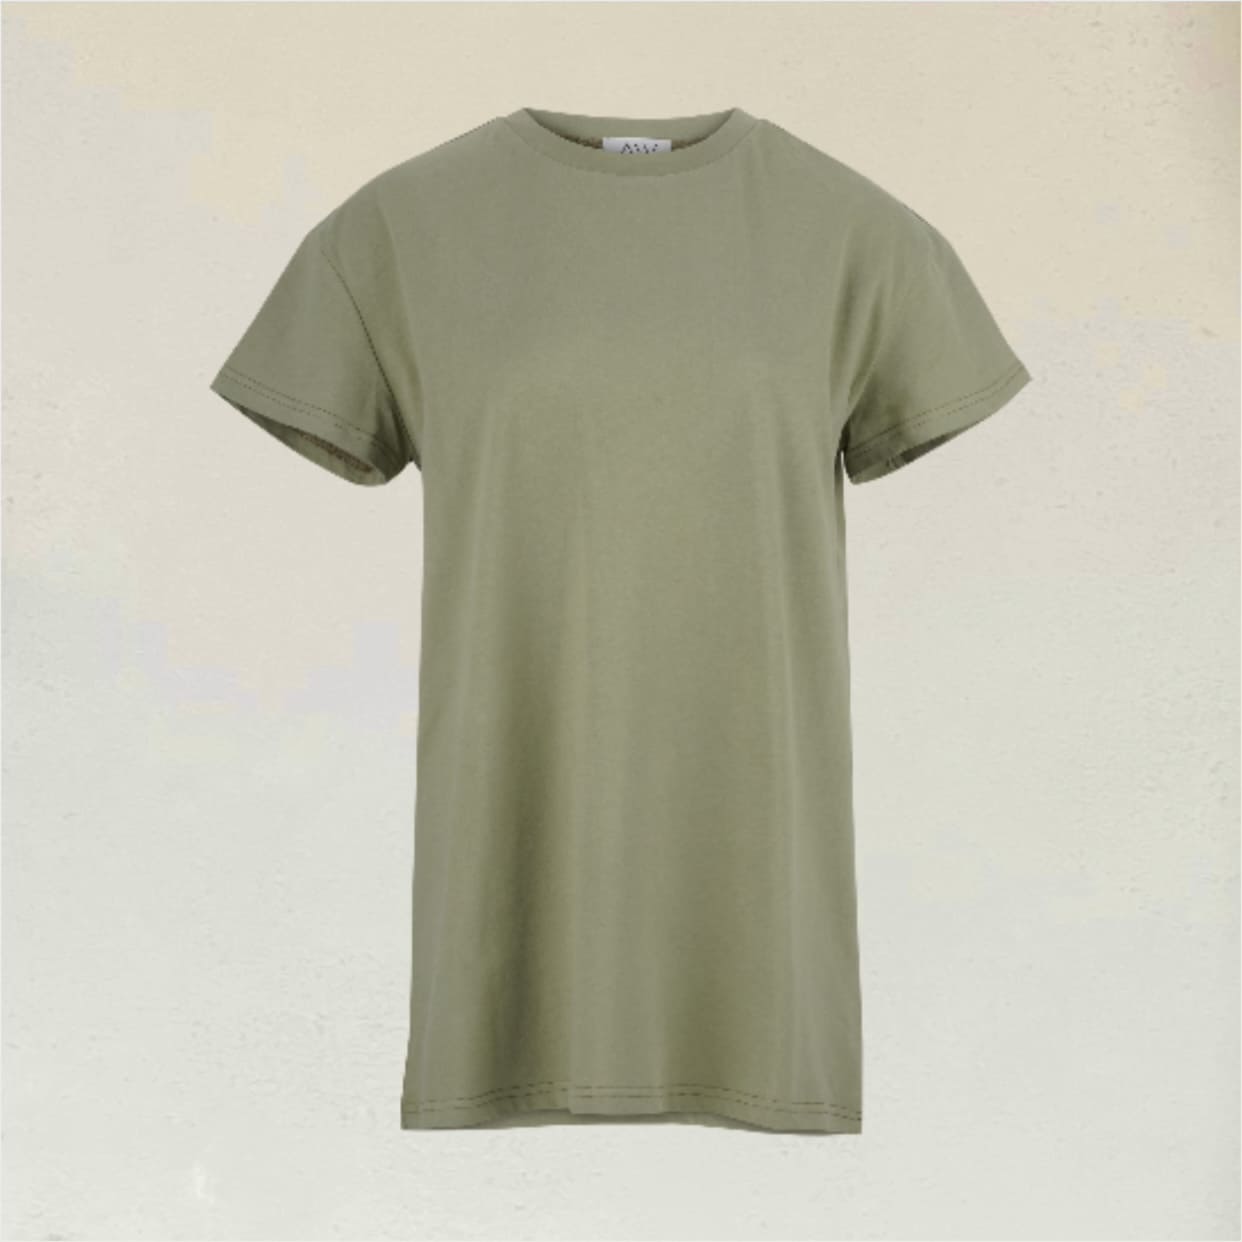 Sage T-Shirt in front of beige background